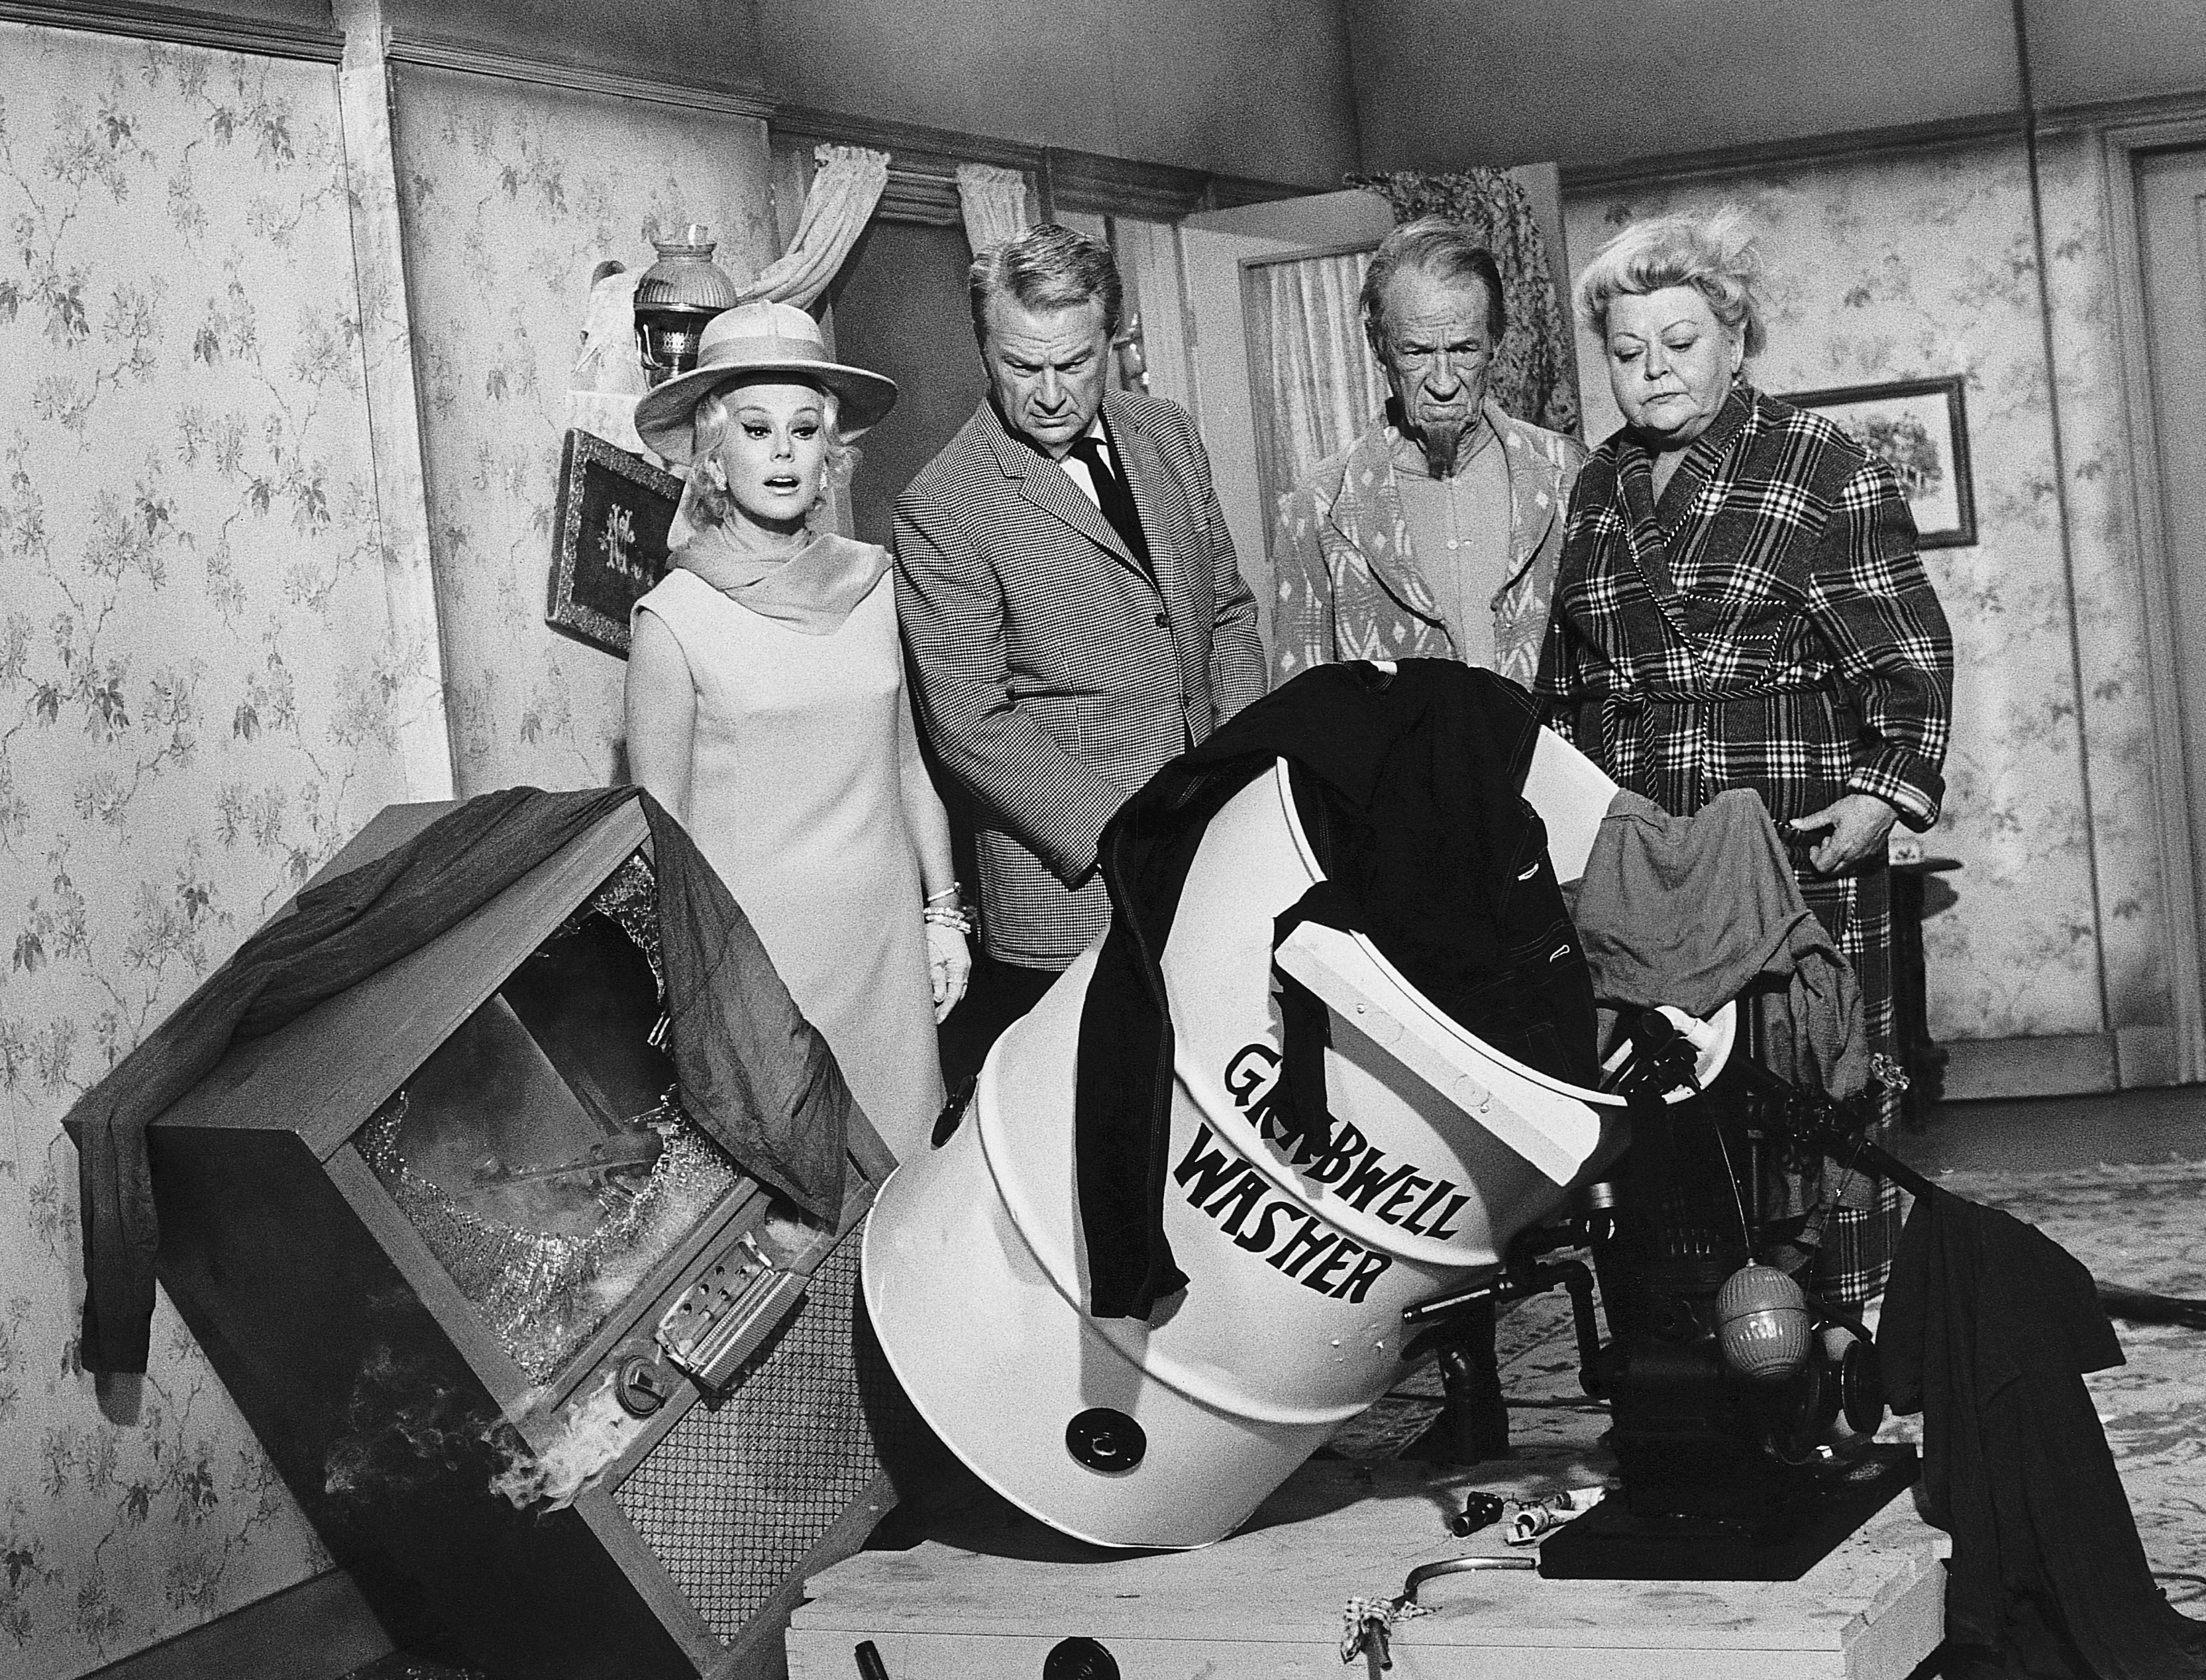 A scene from the long-running television series "Green Acres" publicity handout, circa 1965-1969. | Source: Getty Images